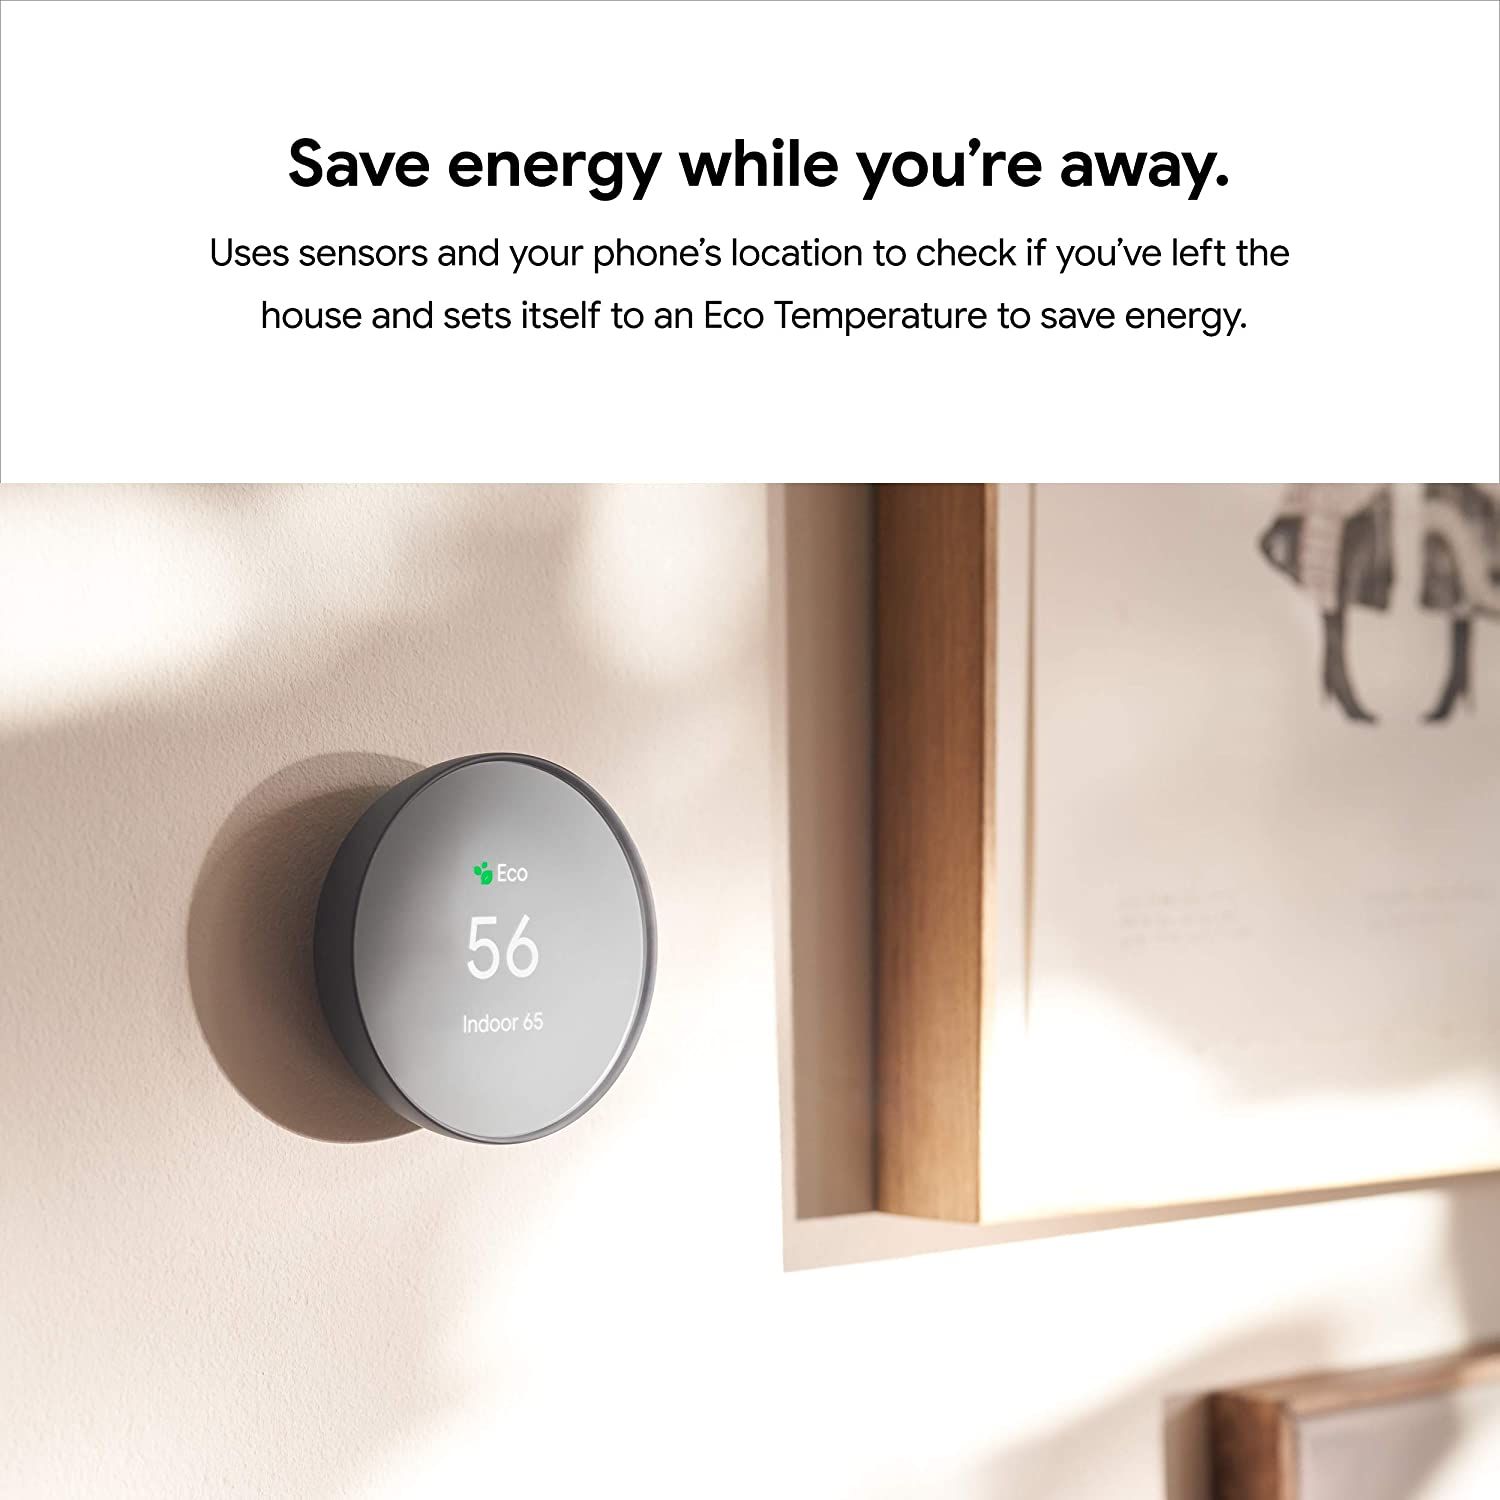 A visual showing Google Nest Thermostat's energy saving feature